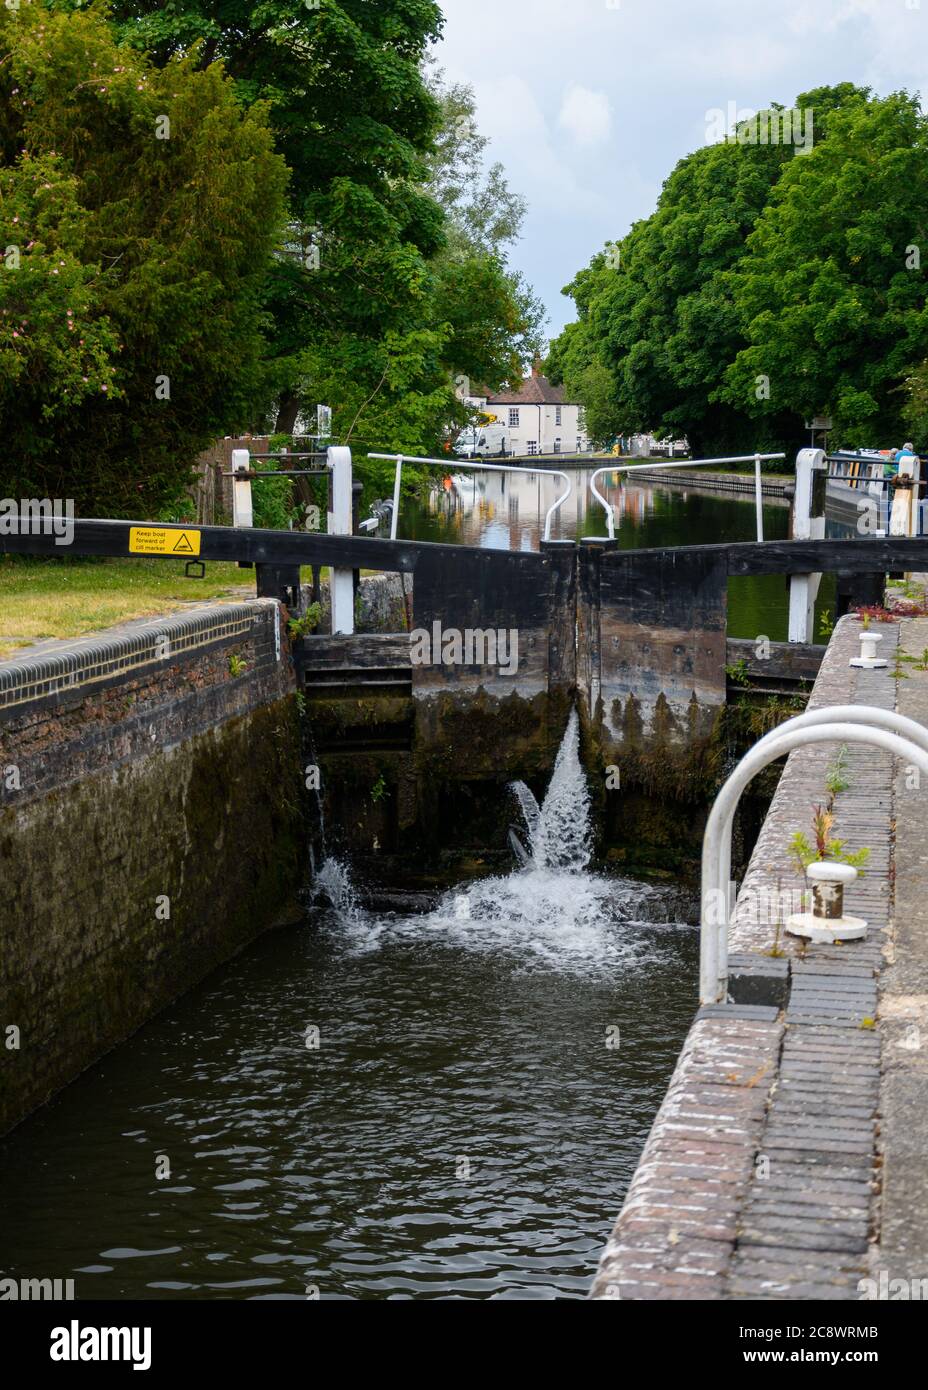 Newbury, United Kingdom - June 09 2020:  A lock gate leaking water into the lock on the River Kennet by Northcroft Lane Stock Photo